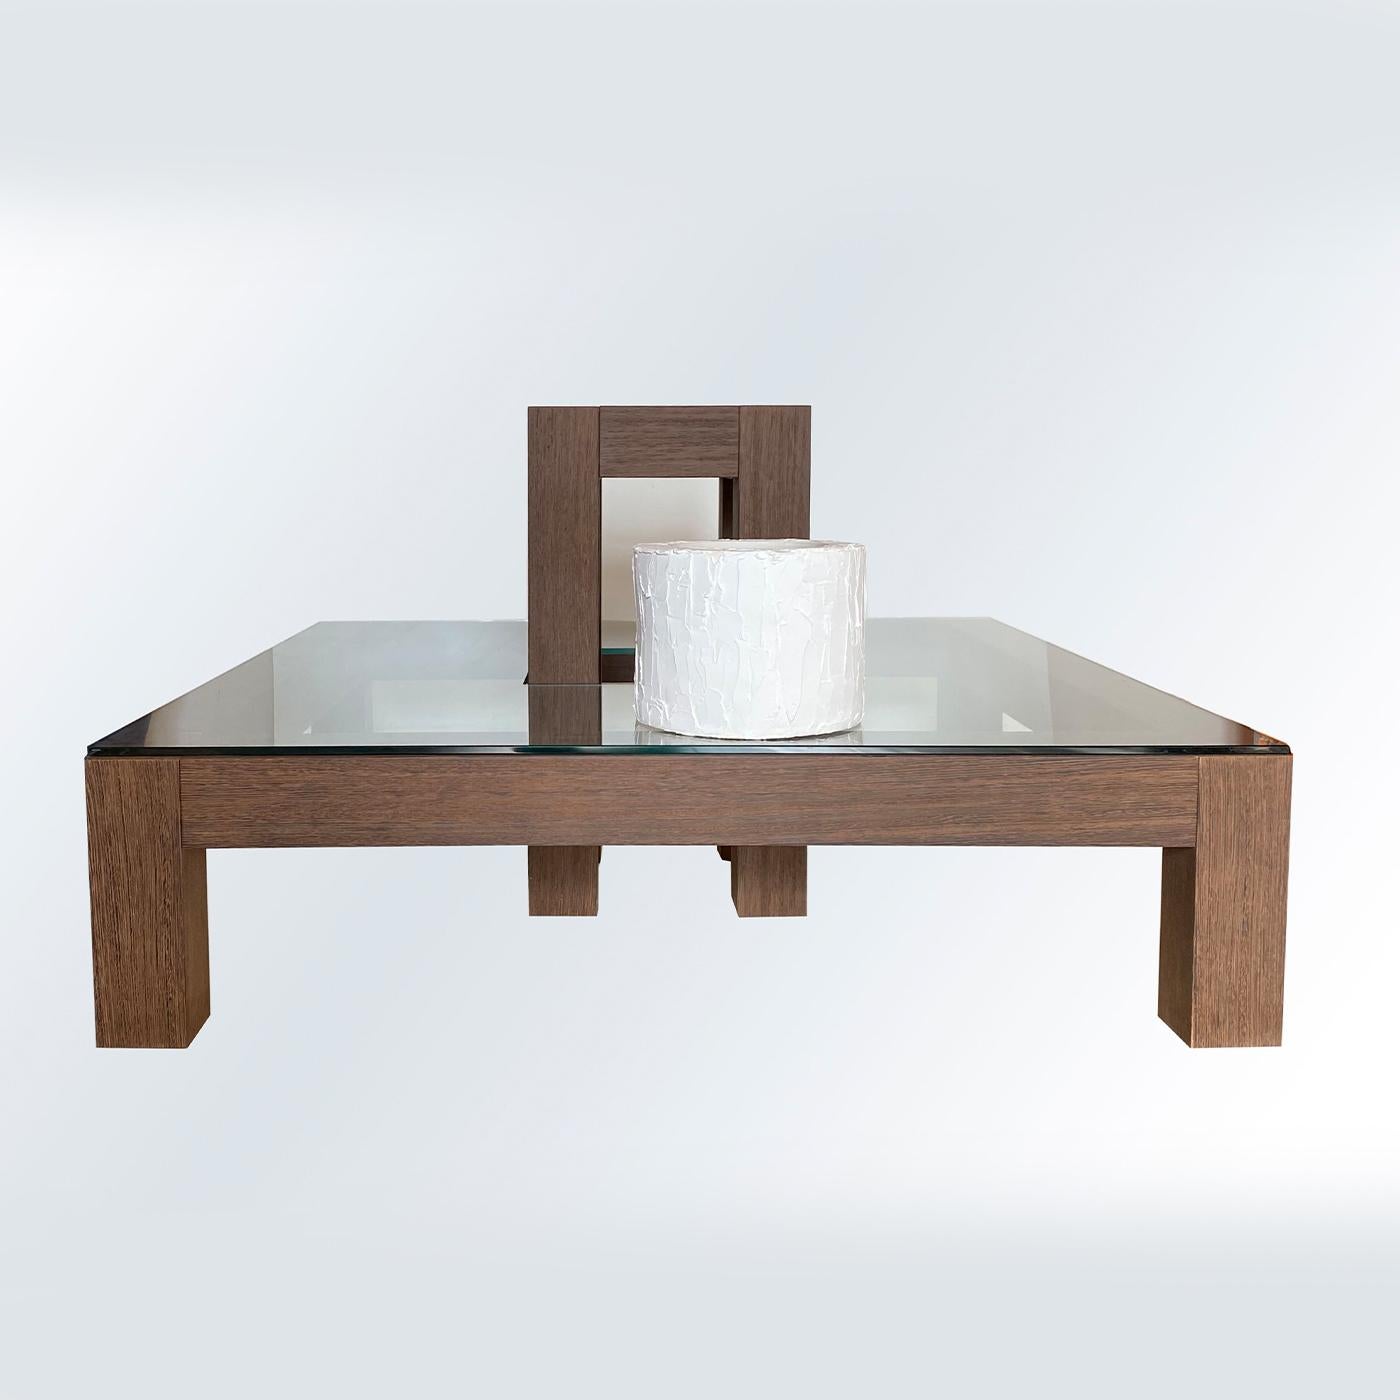 This superb coffee table crafted from prized wenge boasts a sculptural design paying homage to Renaissance master Filippo Brunelleschi. Part of an exclusive limited series counting a total of twenty numbered pieces, the design is marked by bold and